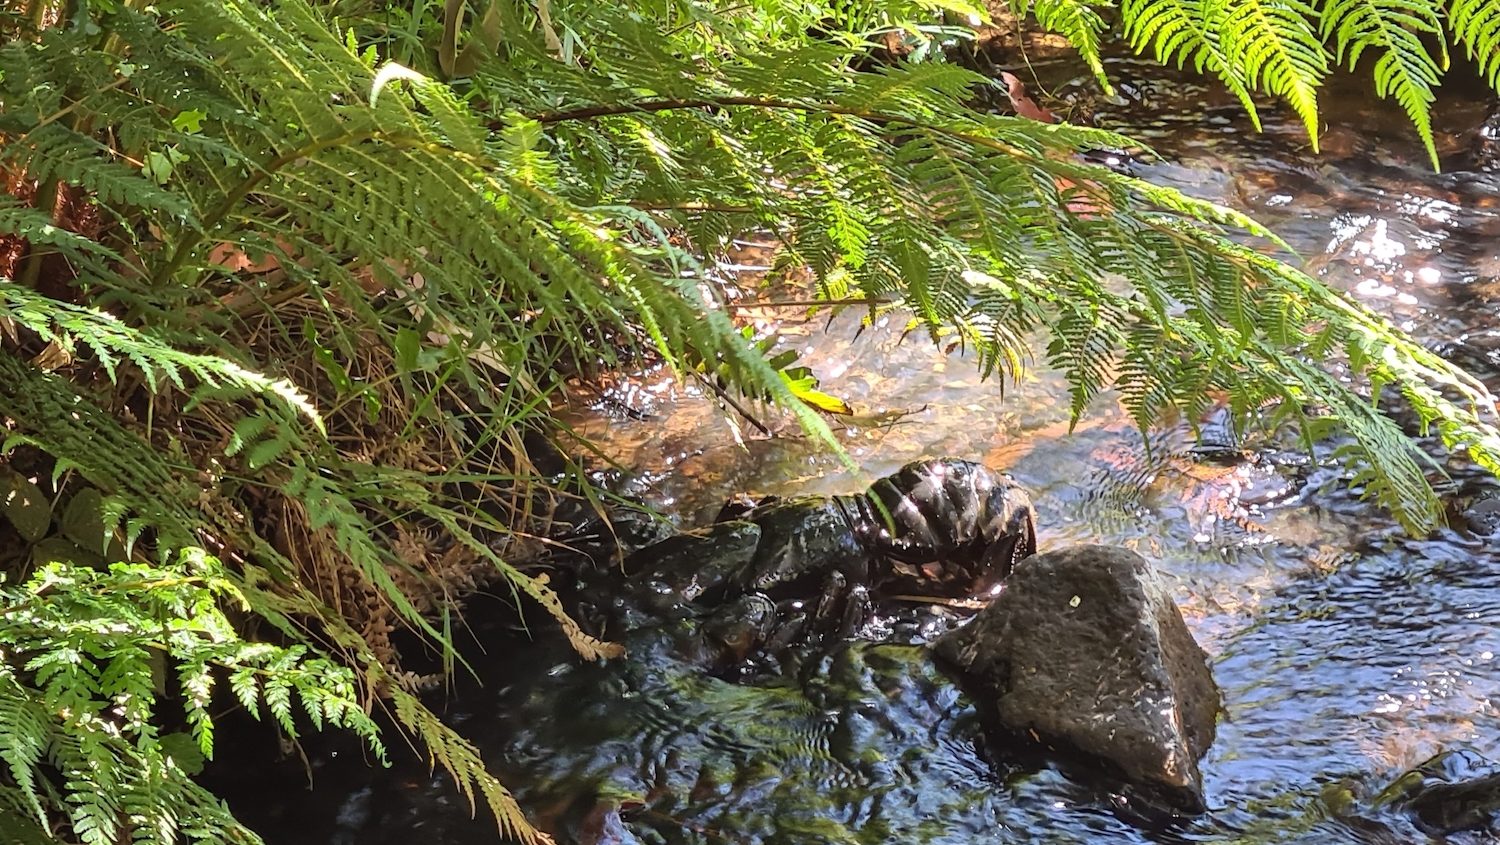 vegetation overhanging a stream with a crayfish in the water